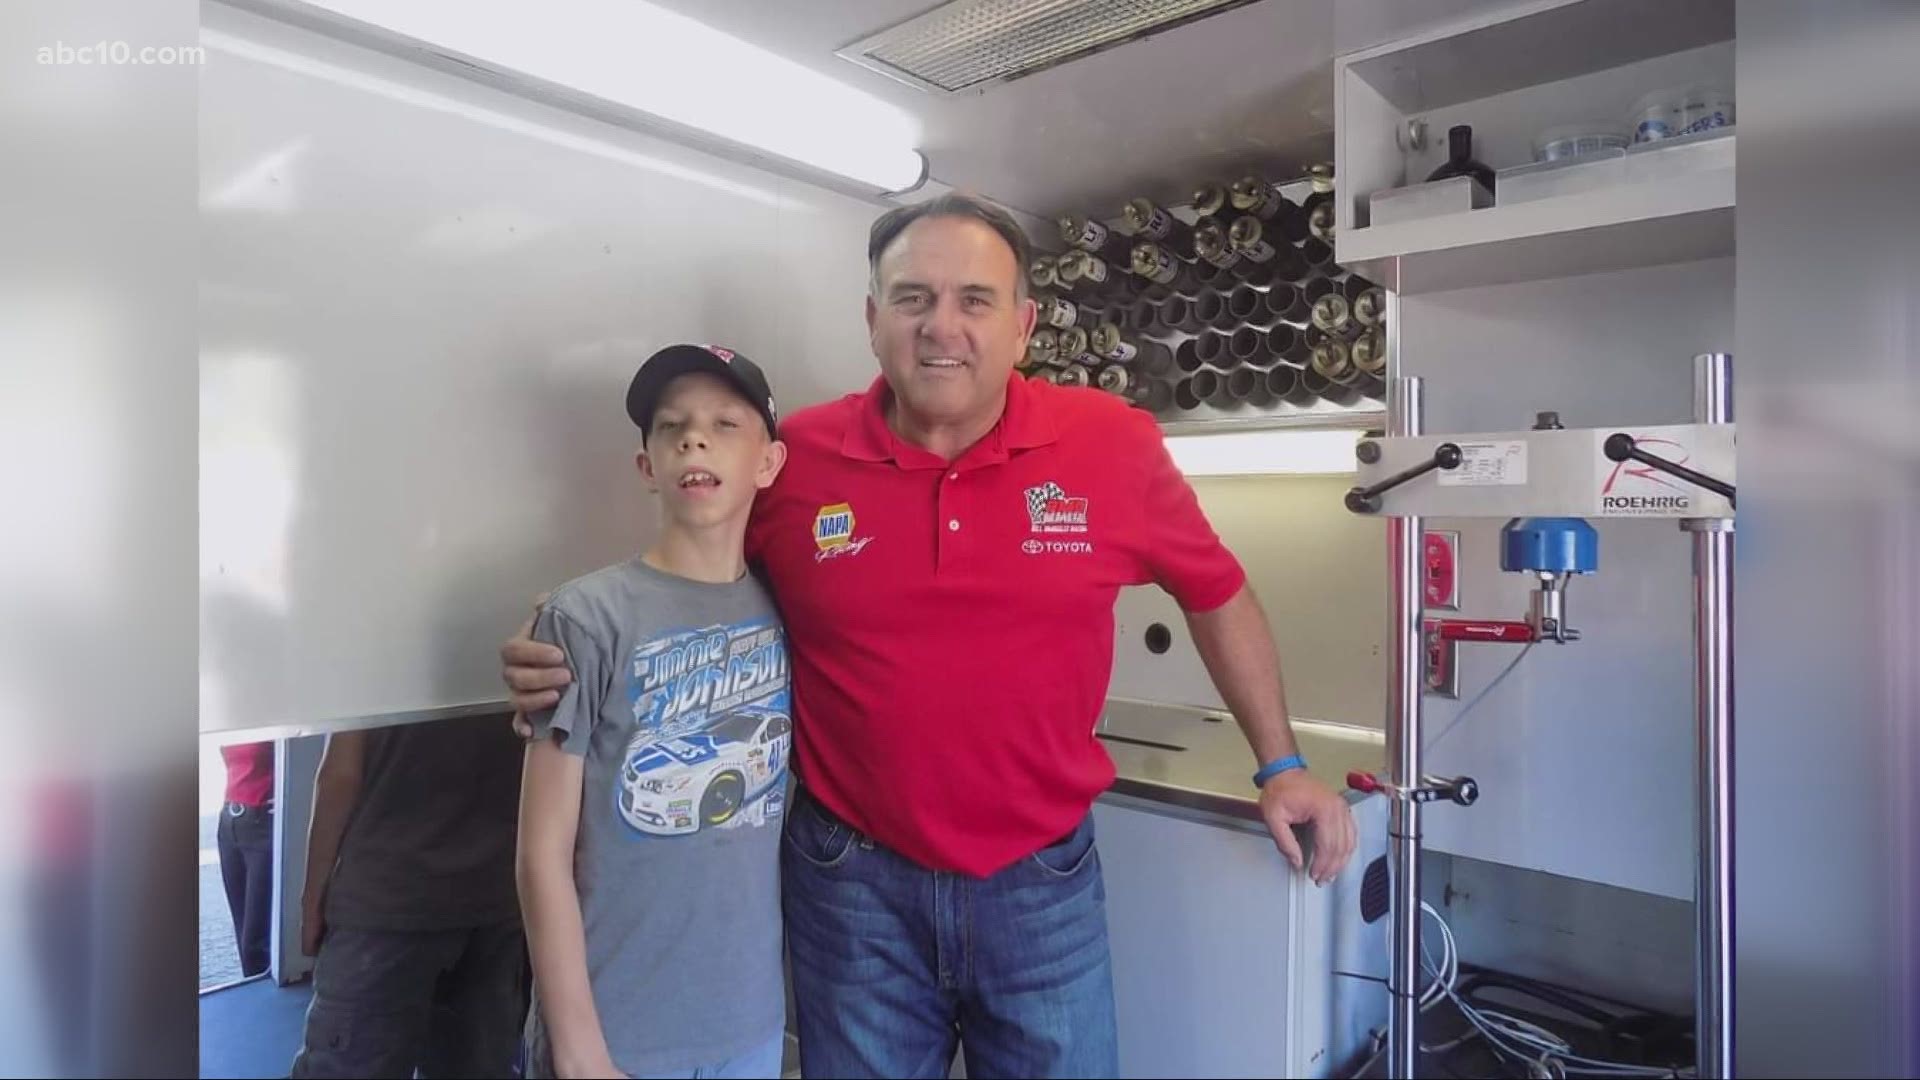 Bill McAnally Racing surprised Cameron, who is on the autism spectrum, with some NASCAR swag and the chance to meet professional racecar drivers in Roseville.